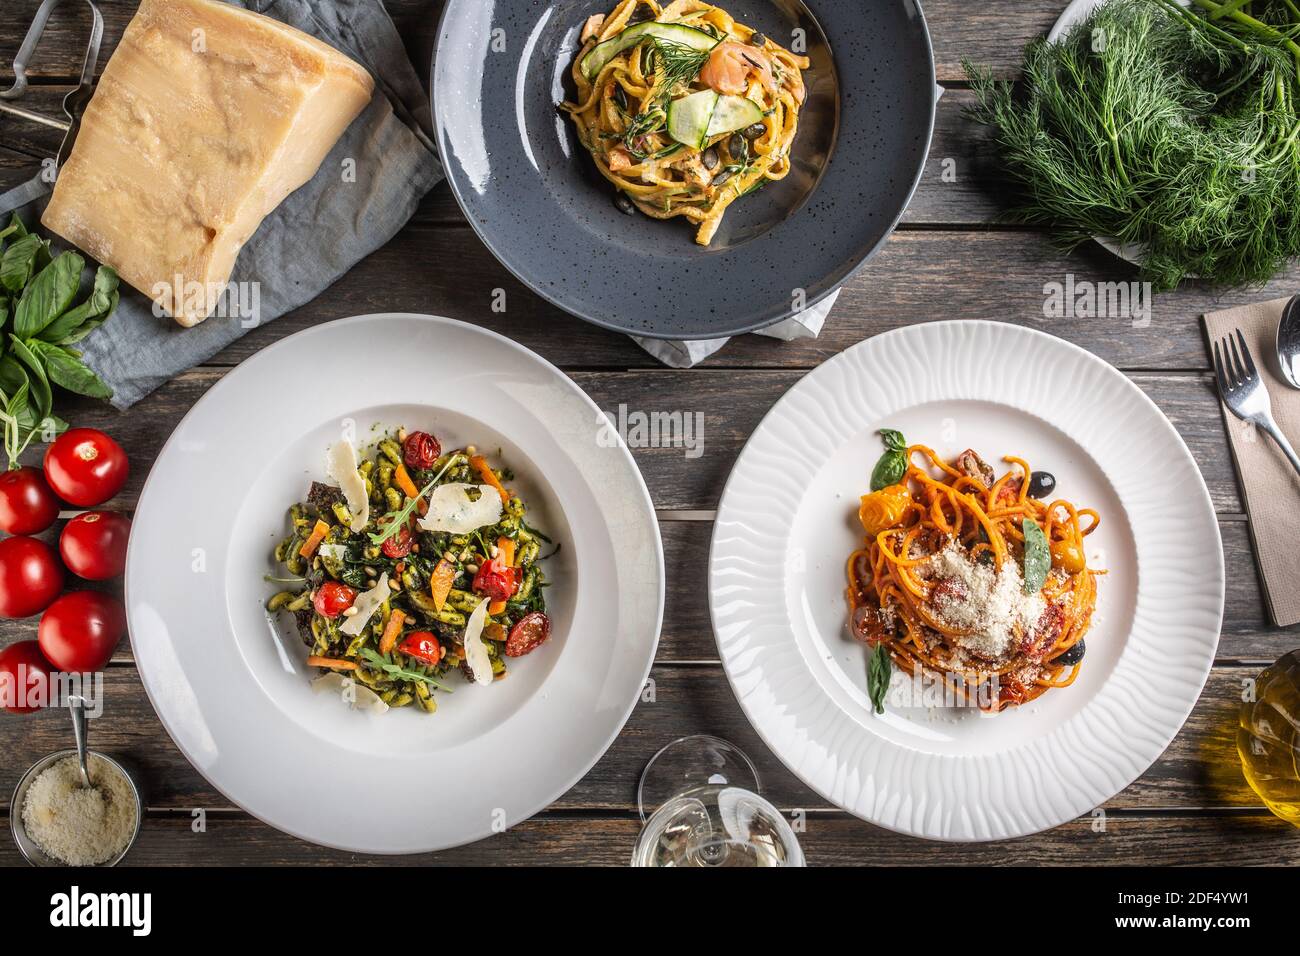 Top view of various pasta dishes served on plates, surrounded by ingredients on a vintage wooden surface. Stock Photo